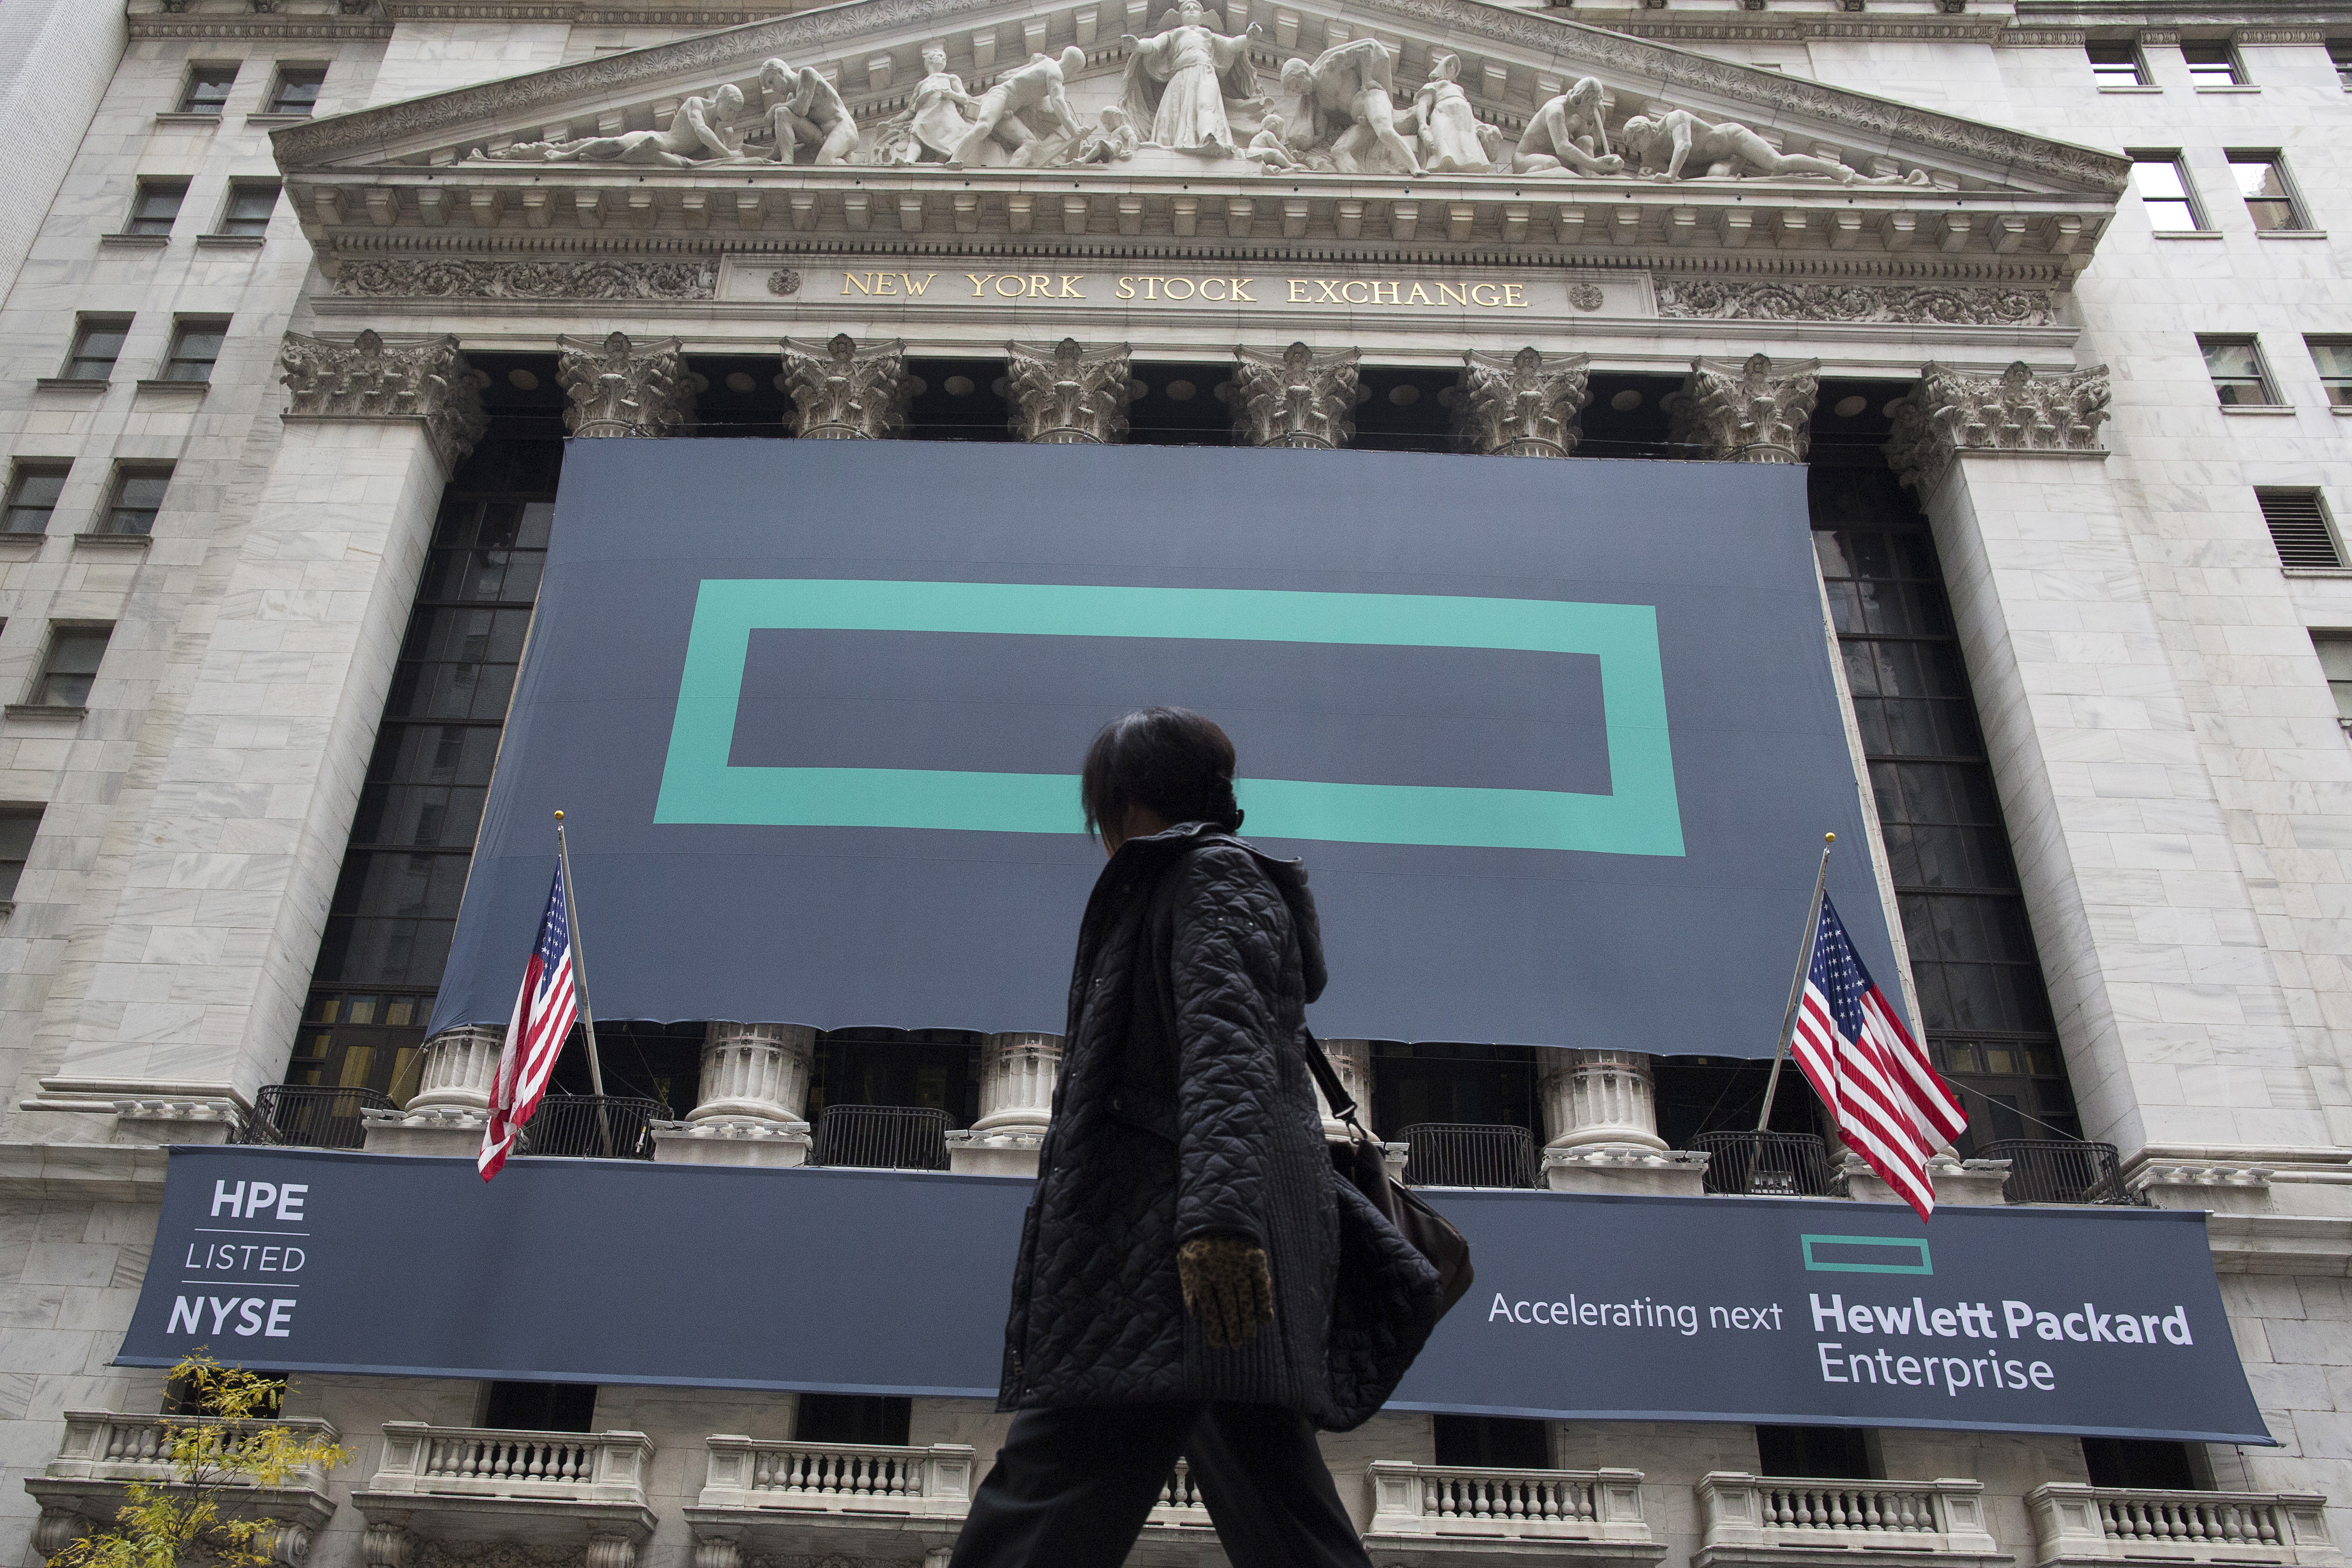 Signs for Hewlett Packard Enterprise Co., cover the facade of the New York Stock Exchange